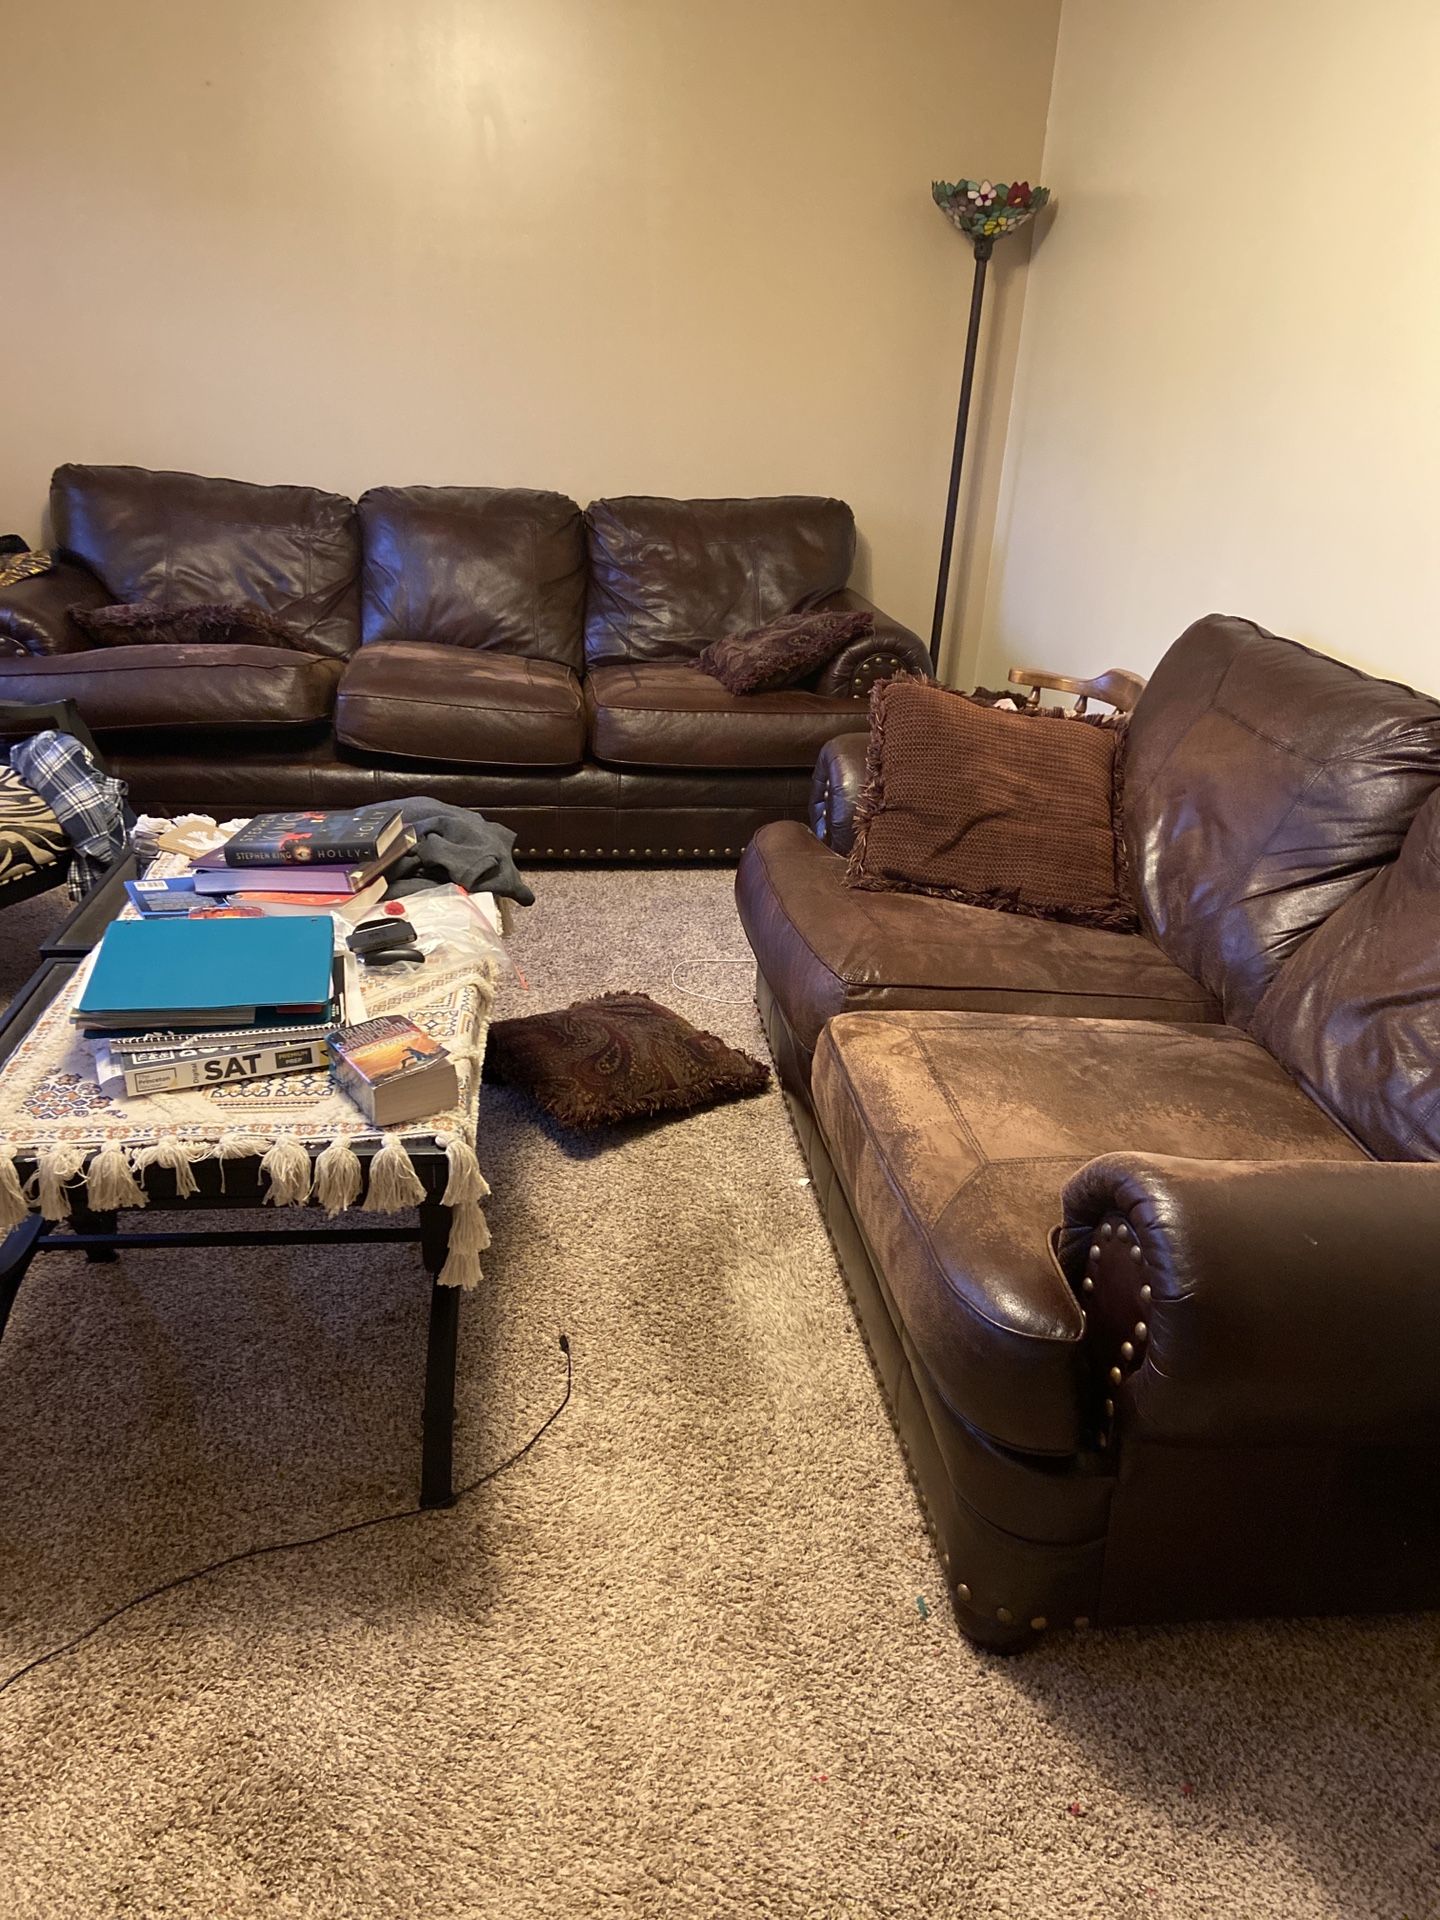 Free leather Sofas and A Recliner